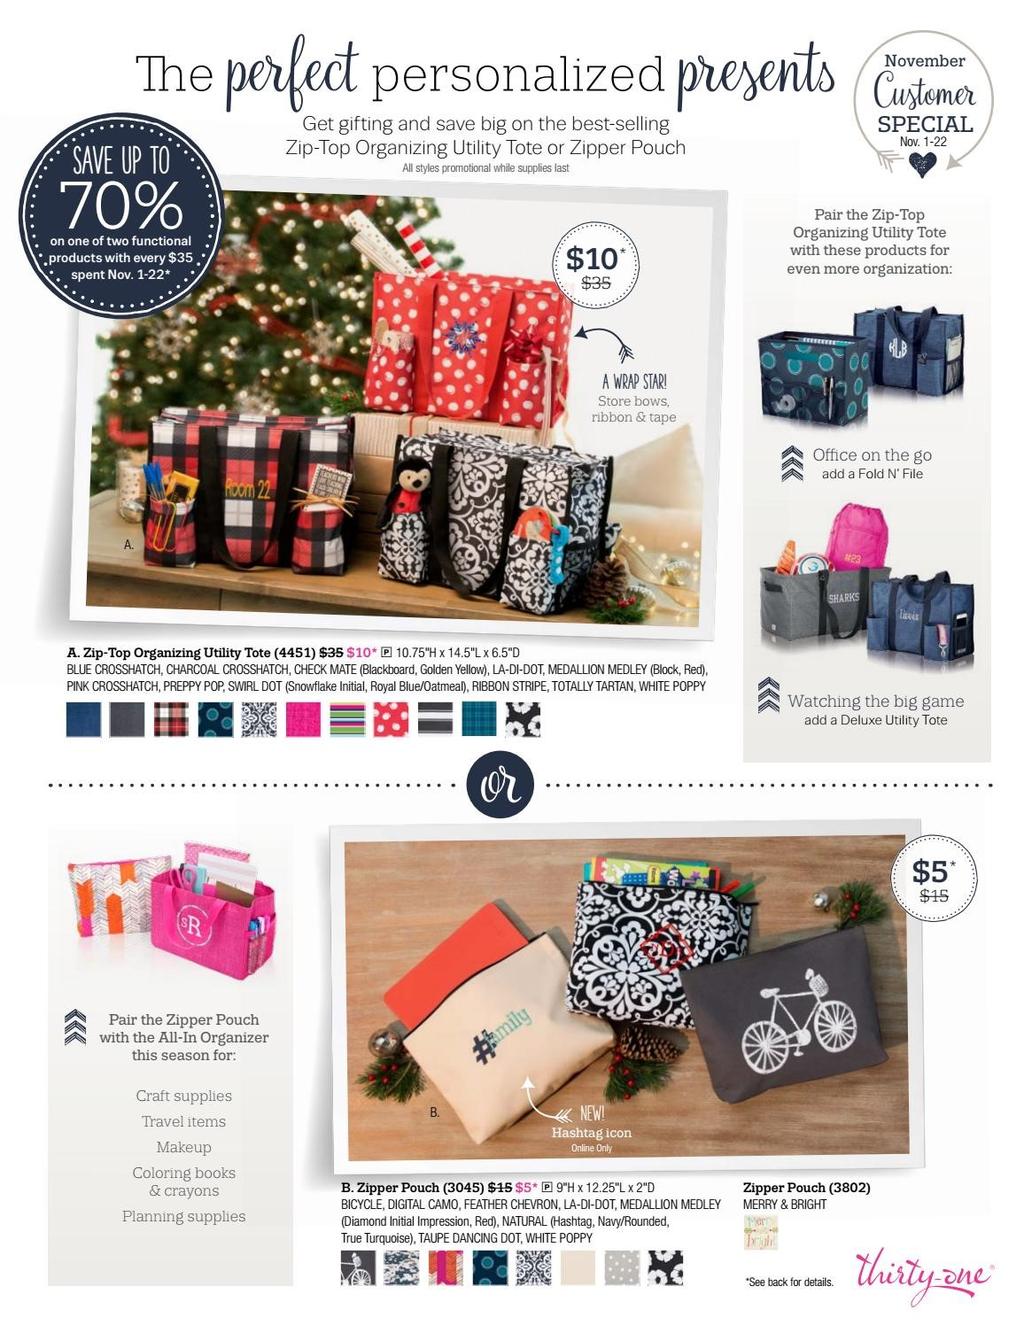 Family Promise Fundraiser To place an order simply log on to: https://www.mythirtyone.com/1723127/ shop/party/eventdetail/9557650?